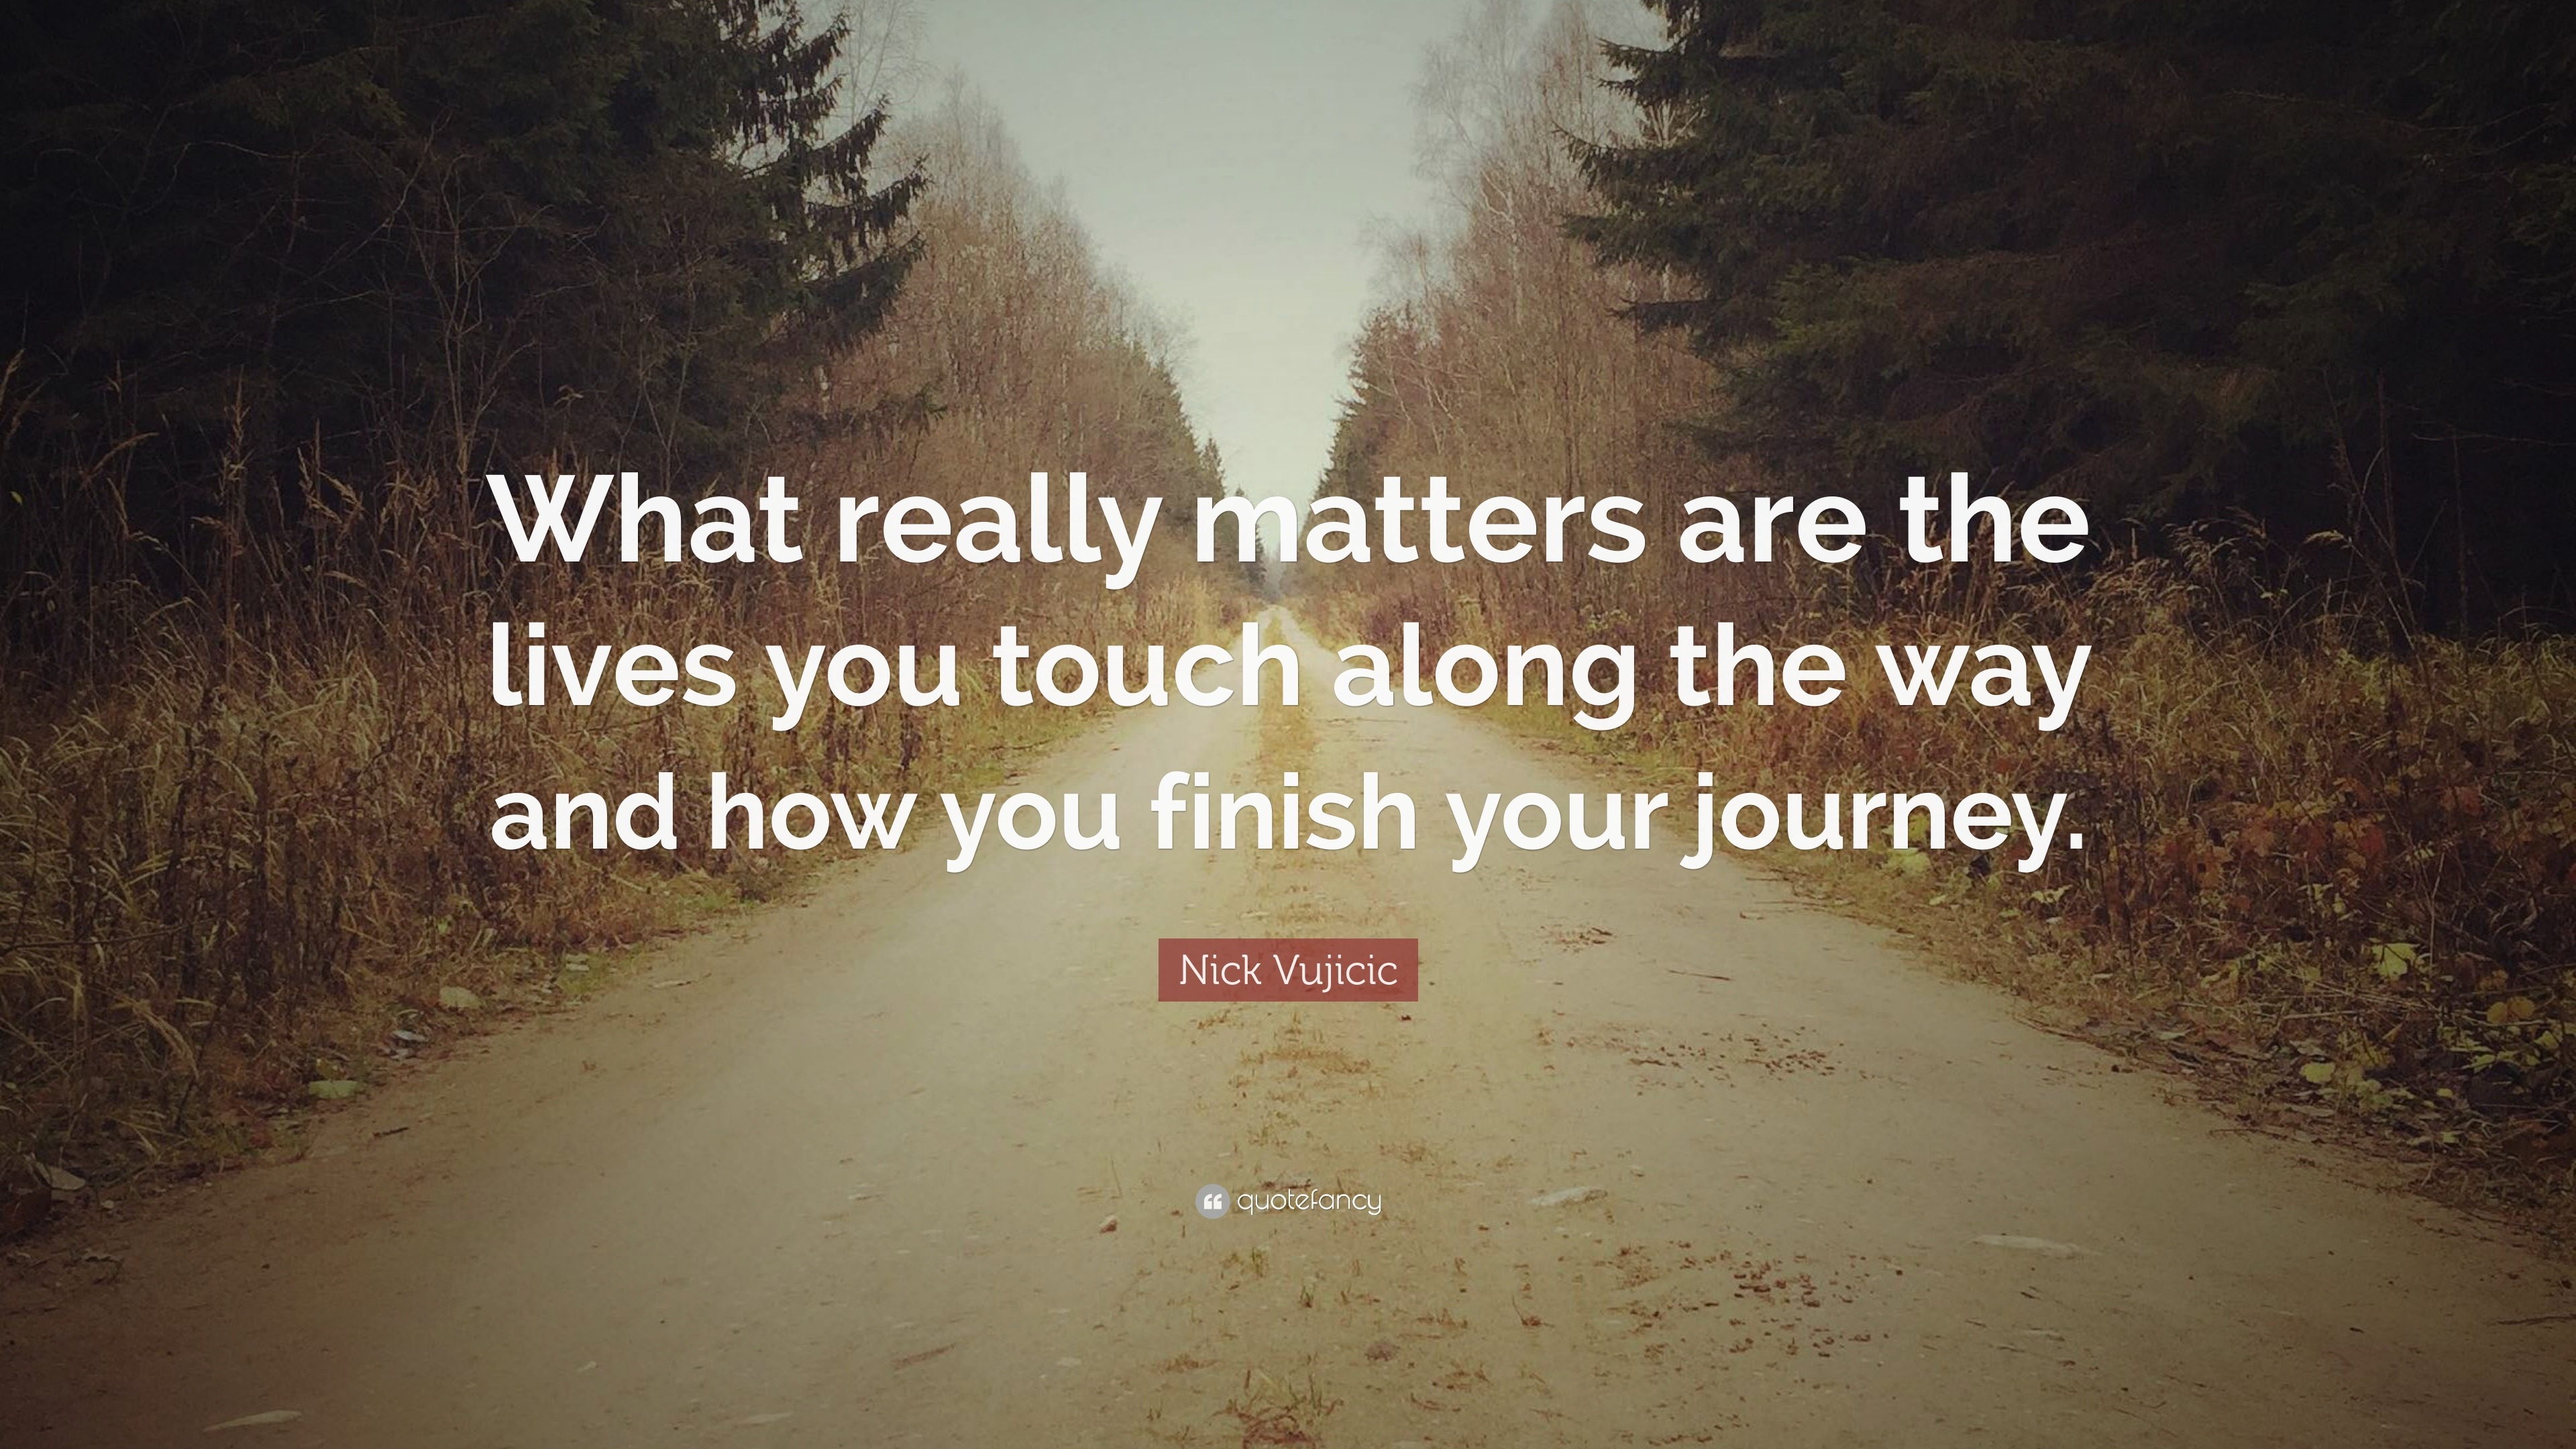 Nick Vujicic Quote “what Really Matters Are The Lives You Touch Along The Way And How You